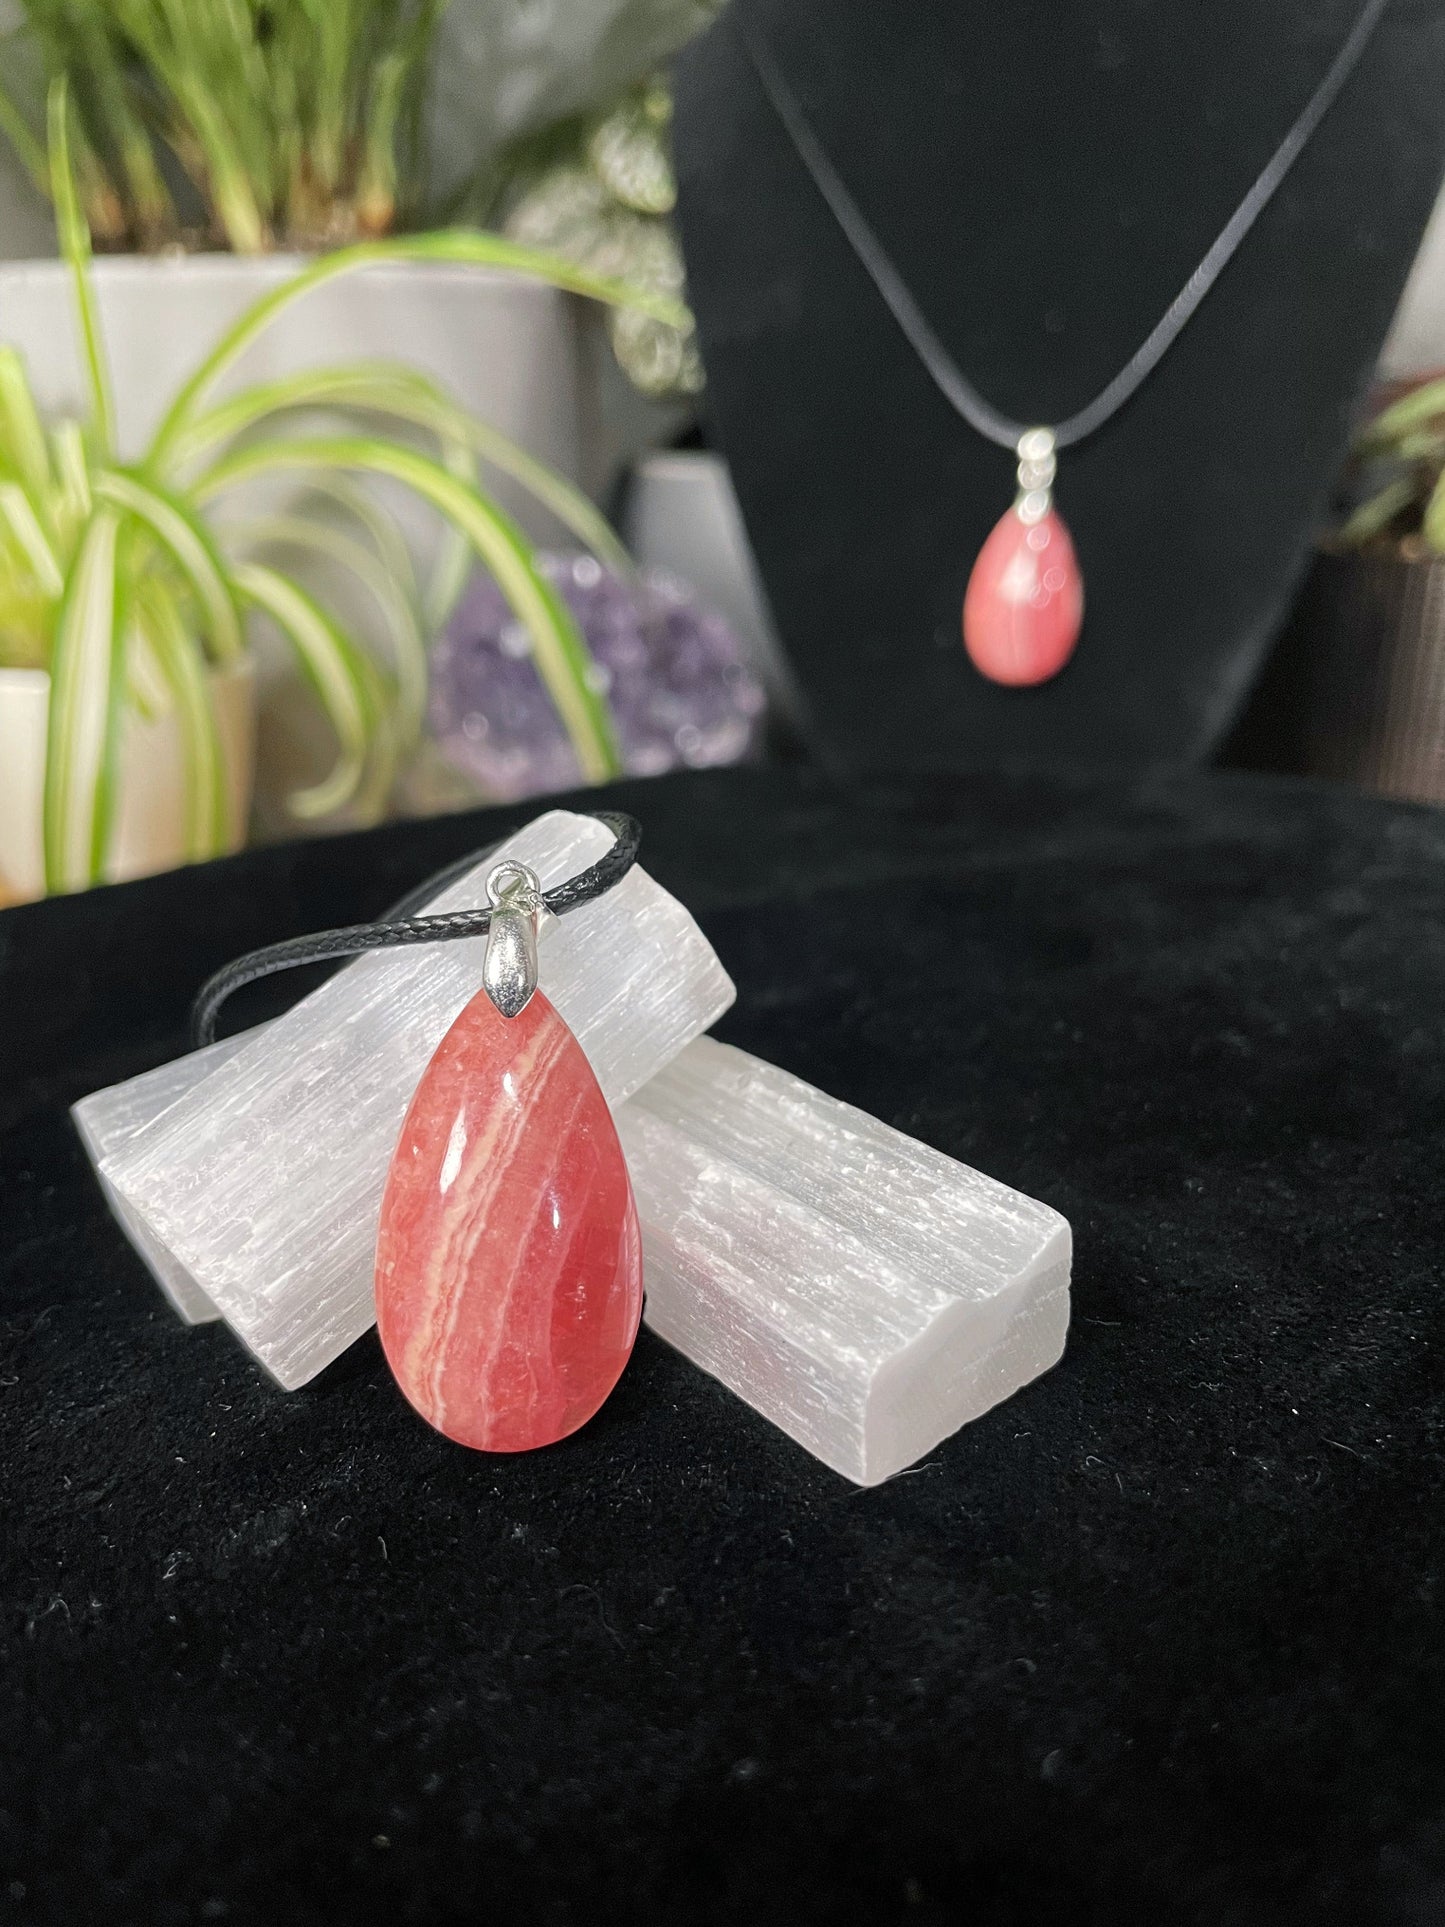 An image of a high-quality pink rhodochrosite teardrop shaped pendant on a necklace. It sits atop some selenite chunks and a black velvet surface.